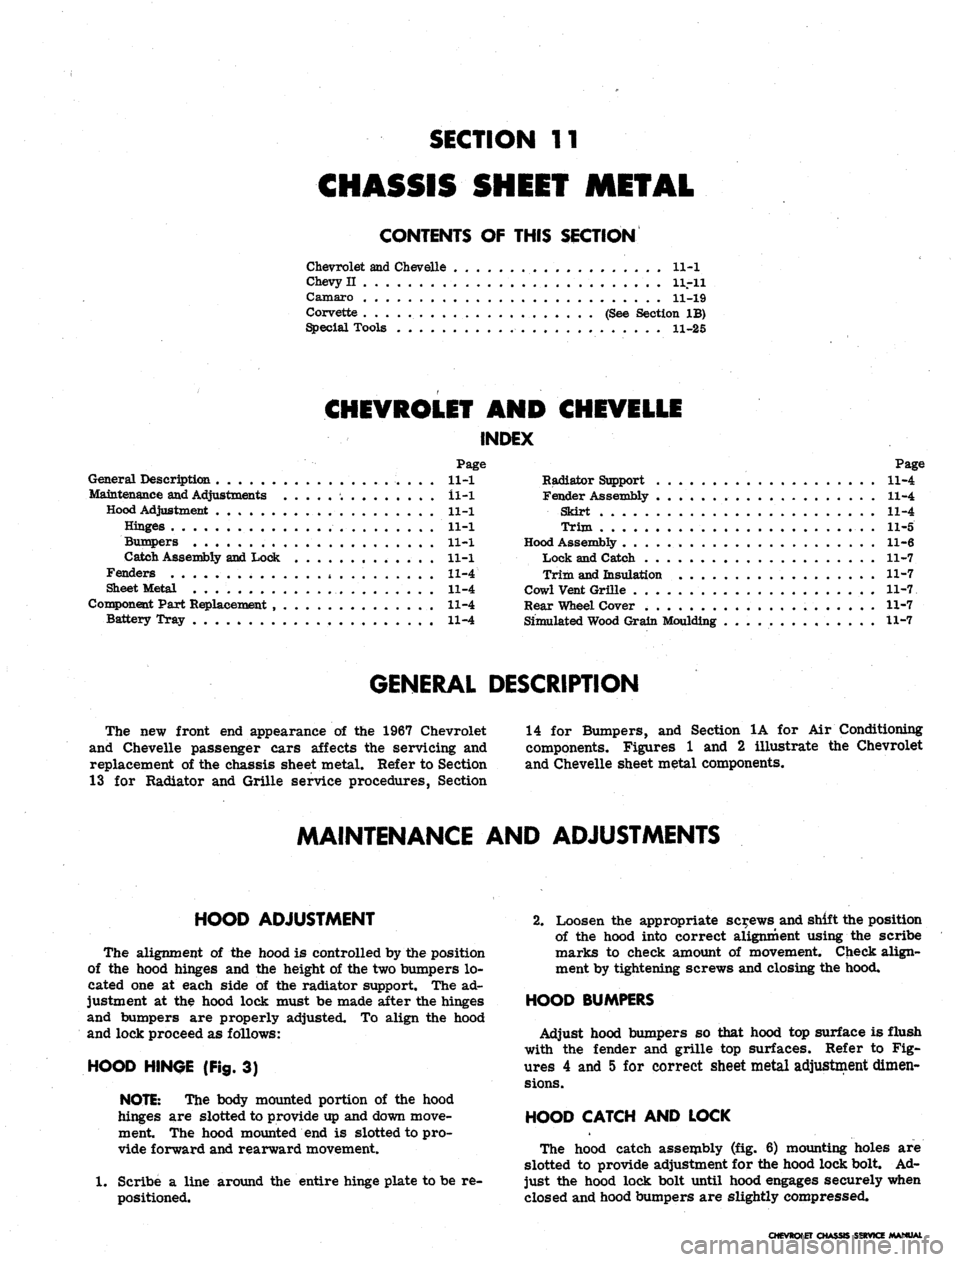 CHEVROLET CAMARO 1967 1.G Chassis Owners Manual 
SECTION 11

CHASSIS SHEET METAL

CONTENTS OF THIS SECTION

Chevrolet and Chevelle 11-1

Chevy II . . 11.-11

Camaro 11-19

Corvette (See Section IB)

Special Tools 11-25

CHEVROLET AND CHEVELLE

INDE